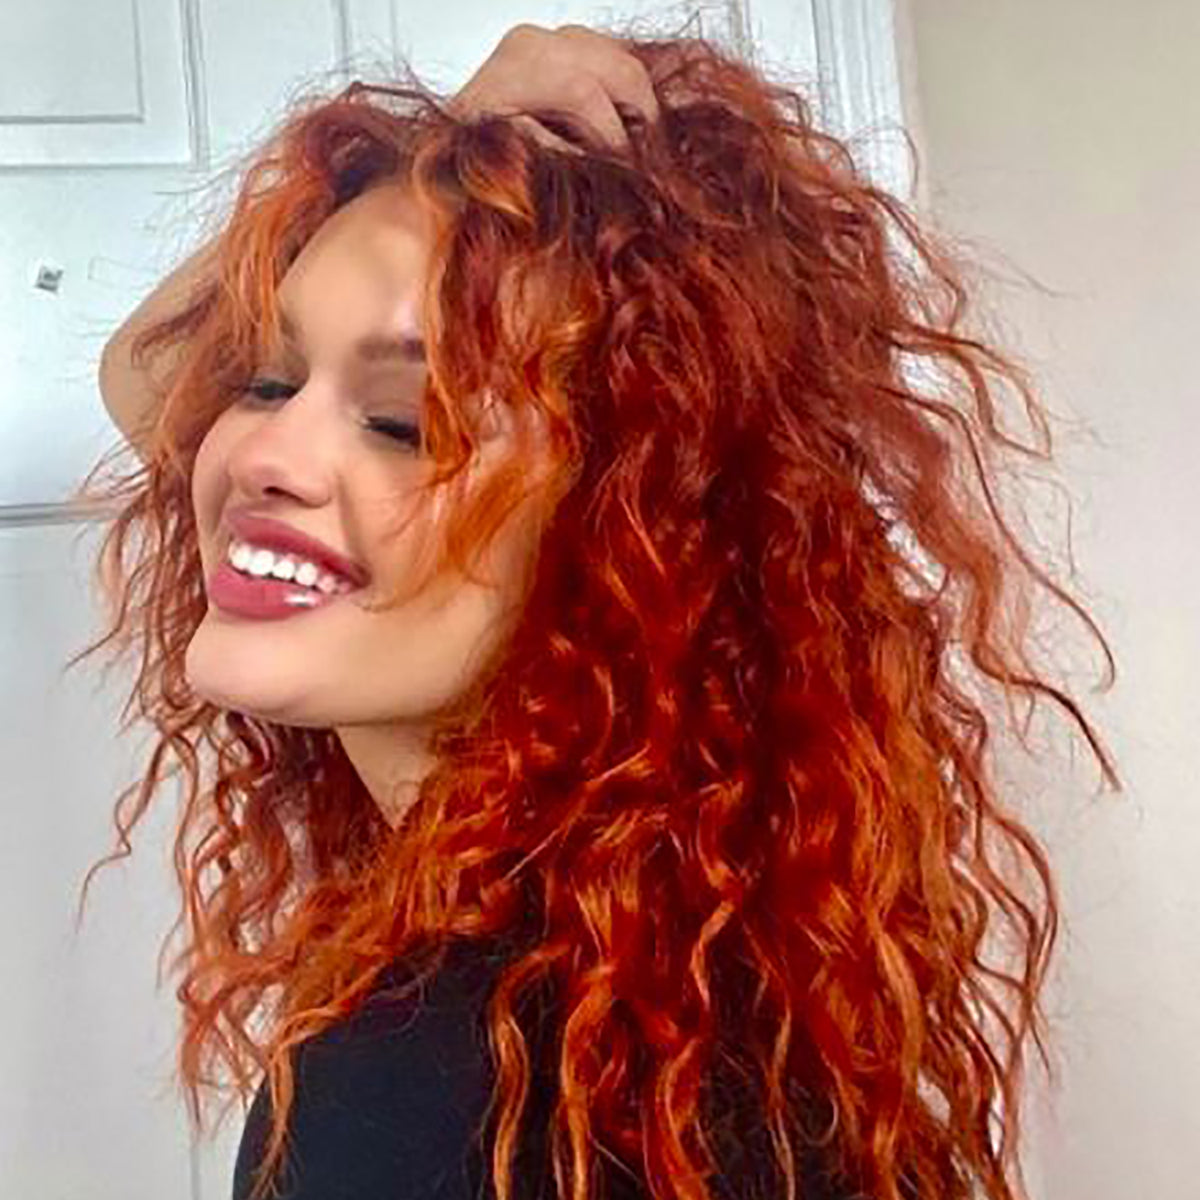 bright orange hair color on person with long, curly pre-lightened hair